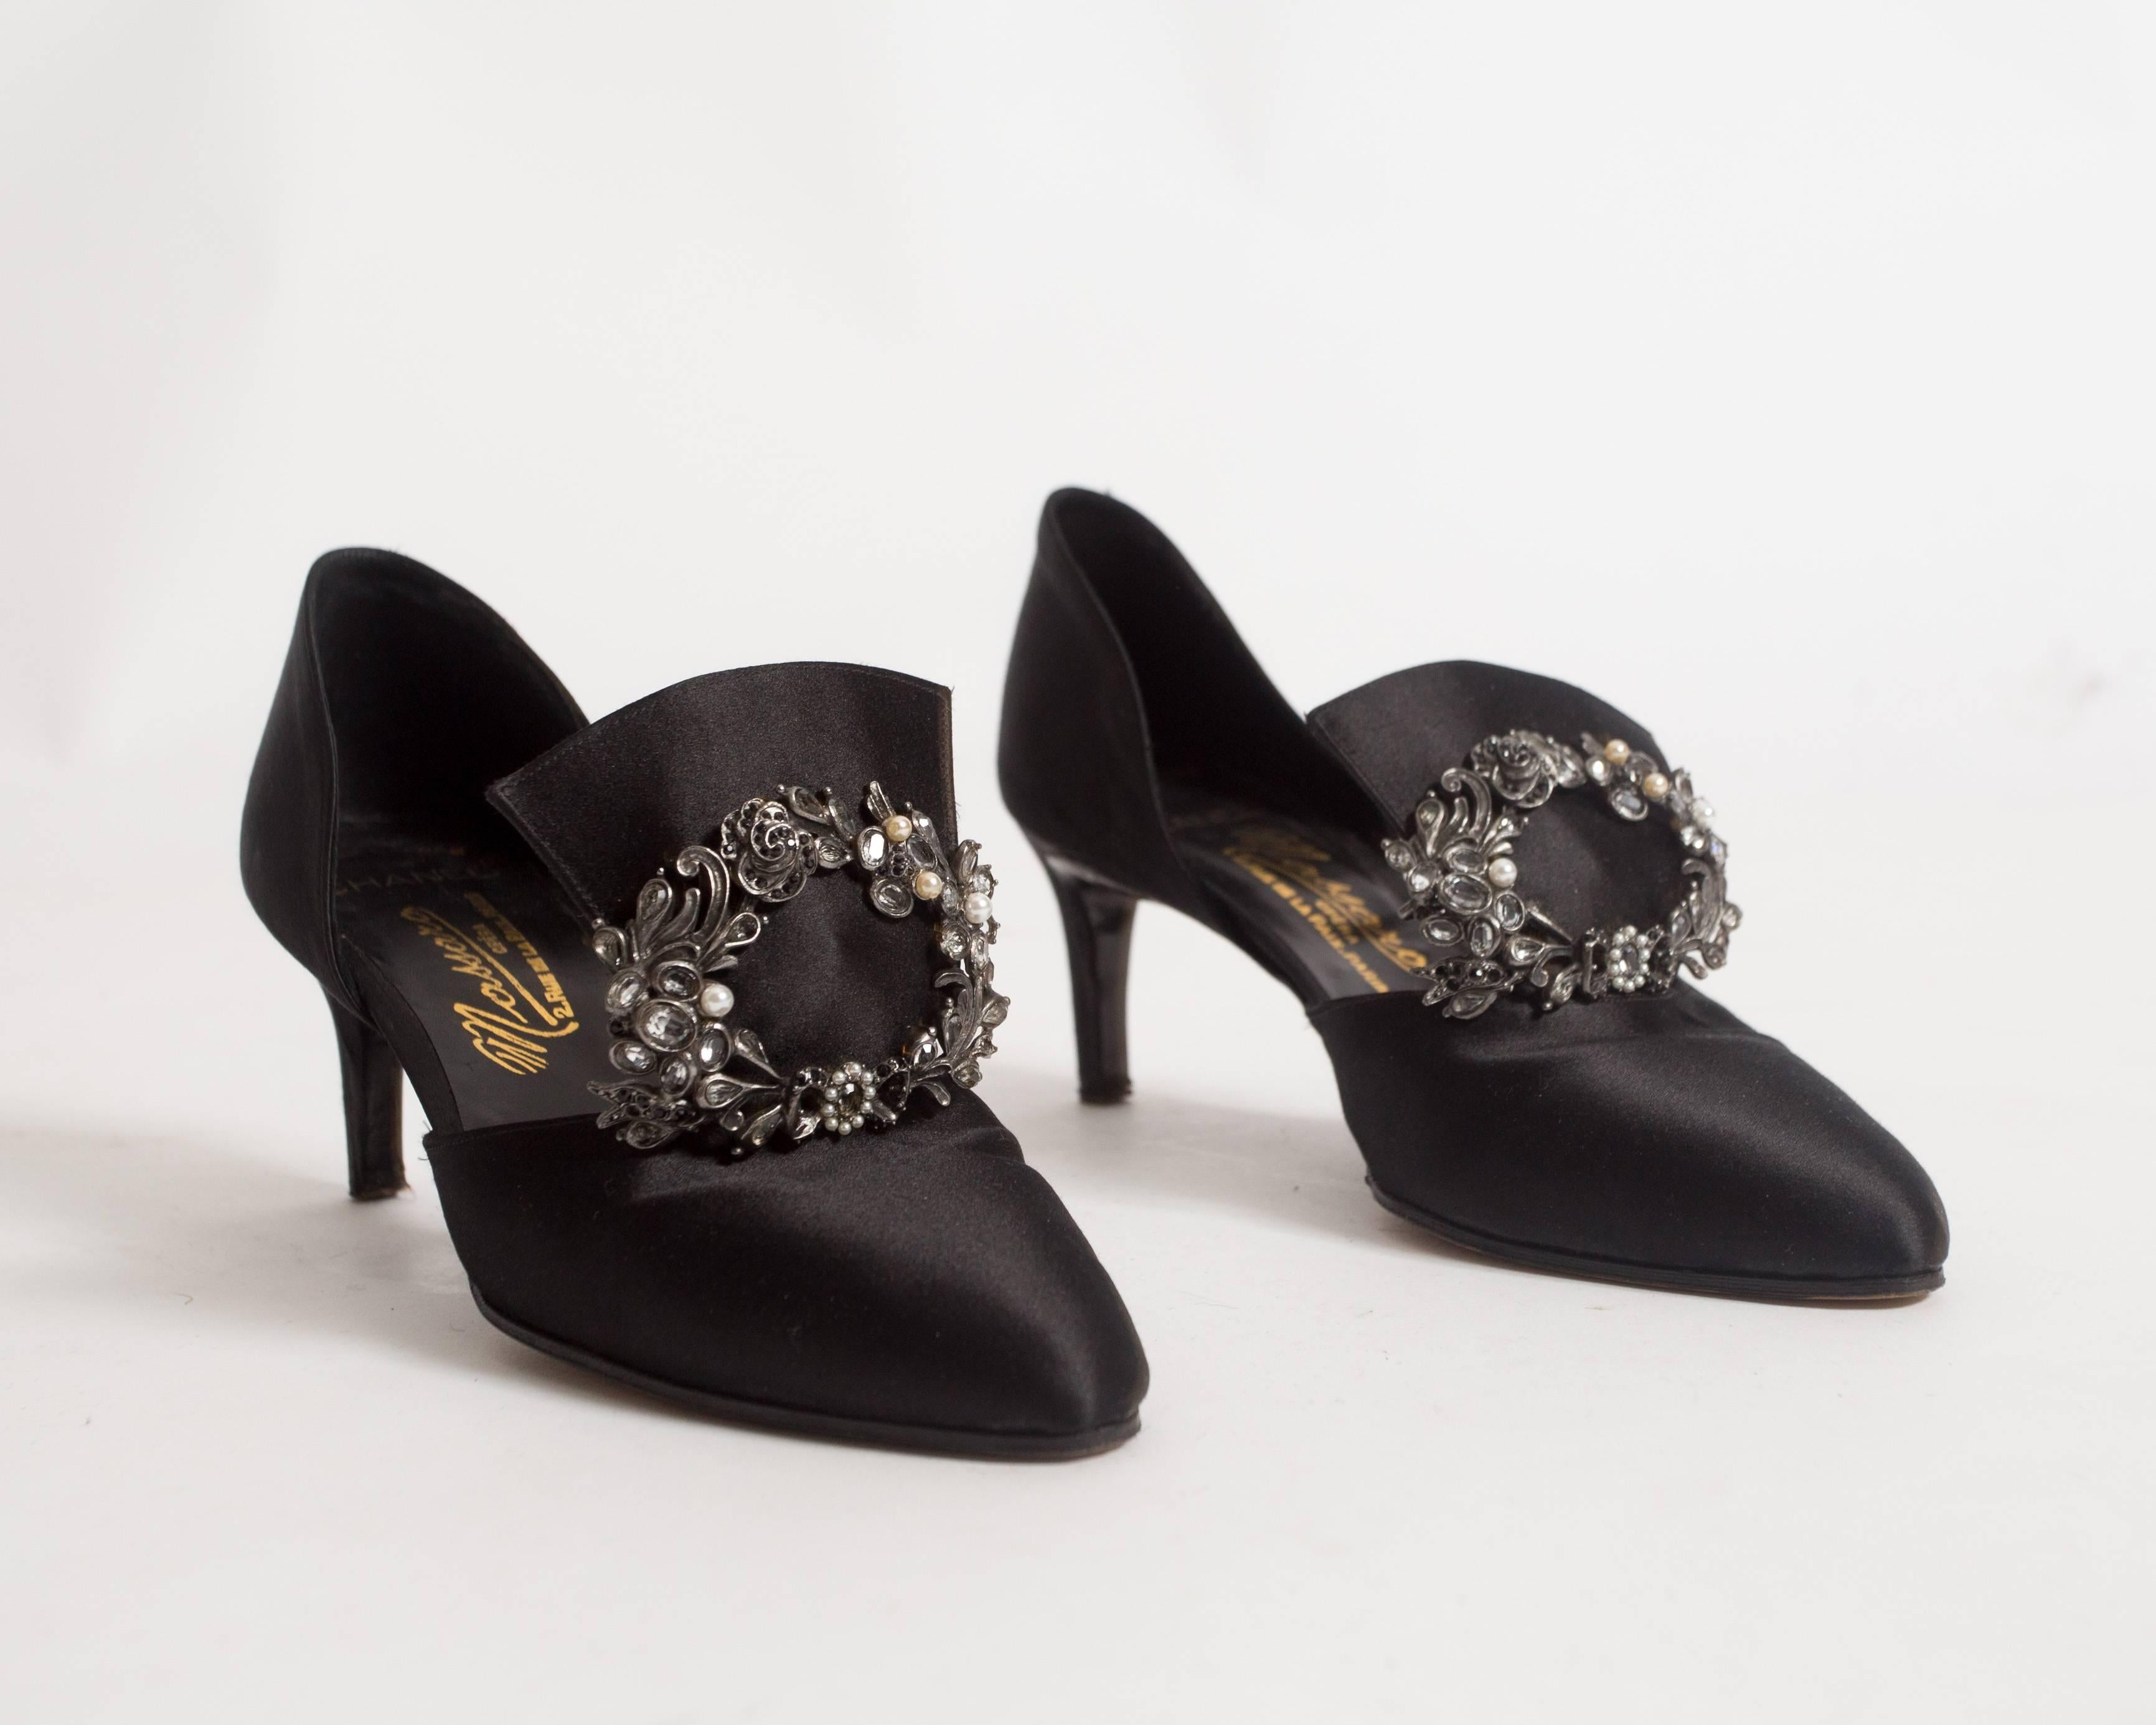 Fine and rare haute couture Chanel pumps by Massaro, constructed in black satin with a silver metal brooch on the tongue. 

Circa 1950-1959

Haute Couture Massaro shoes for Chanel are all hand made and take over 40 hours to make, the ongoing